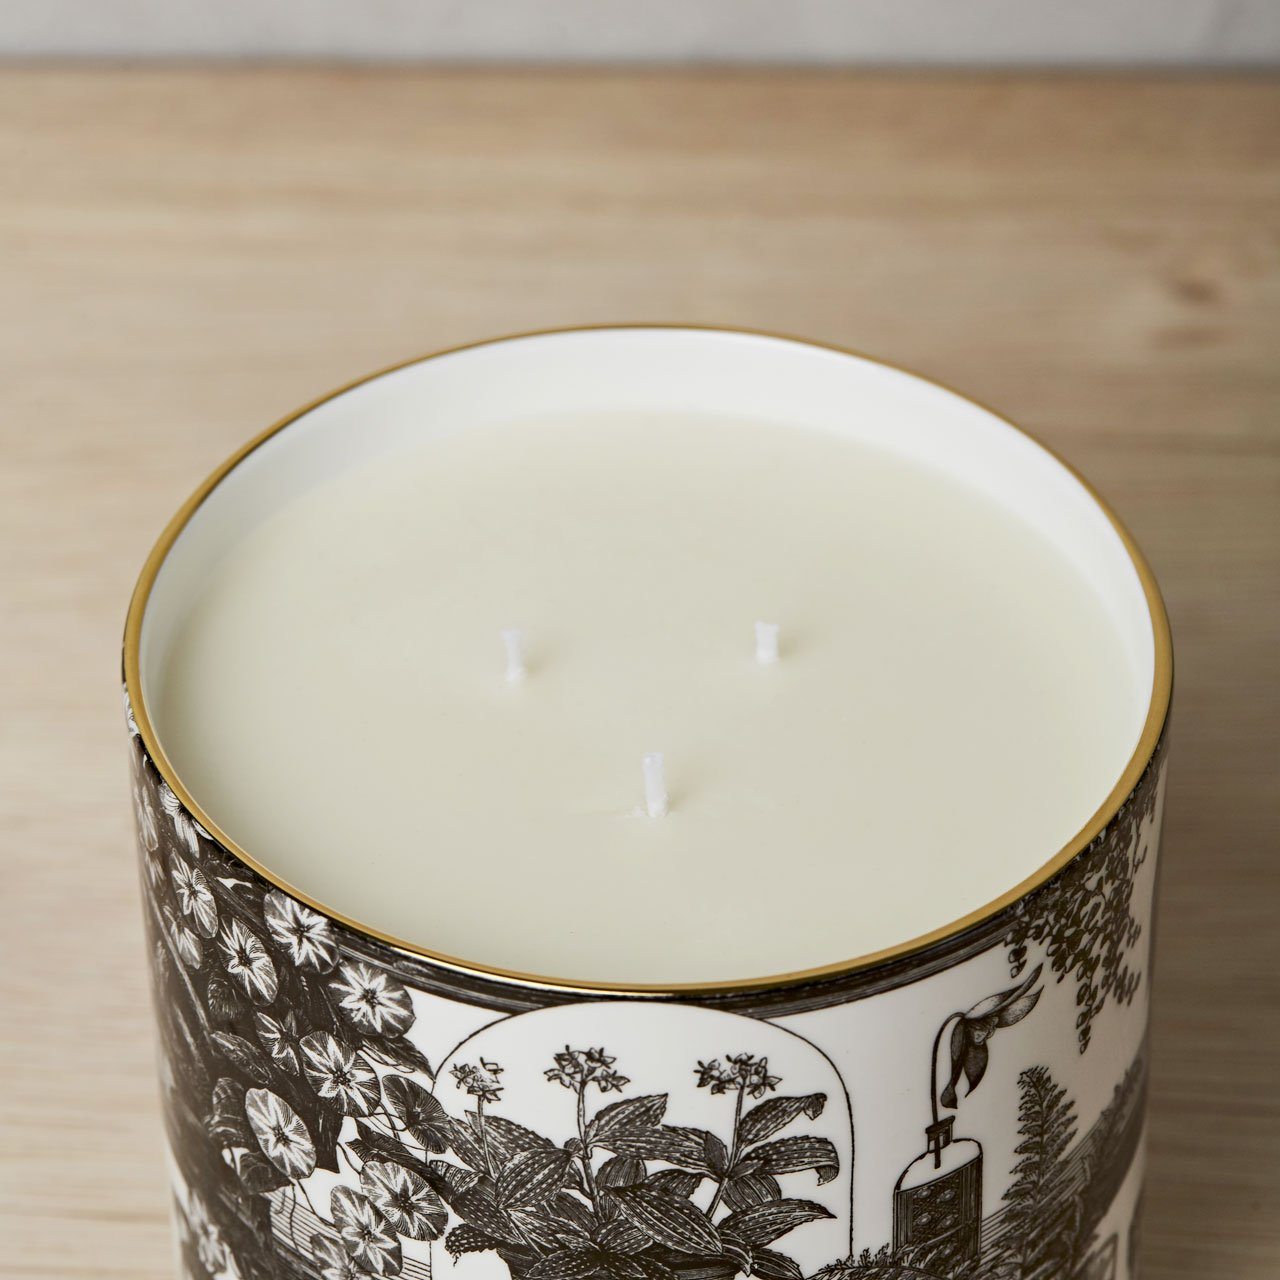 The Tropical Paradise 3 Wick Scented Ceramic Candle - Chase and Wonder - Proudly Made in Britain